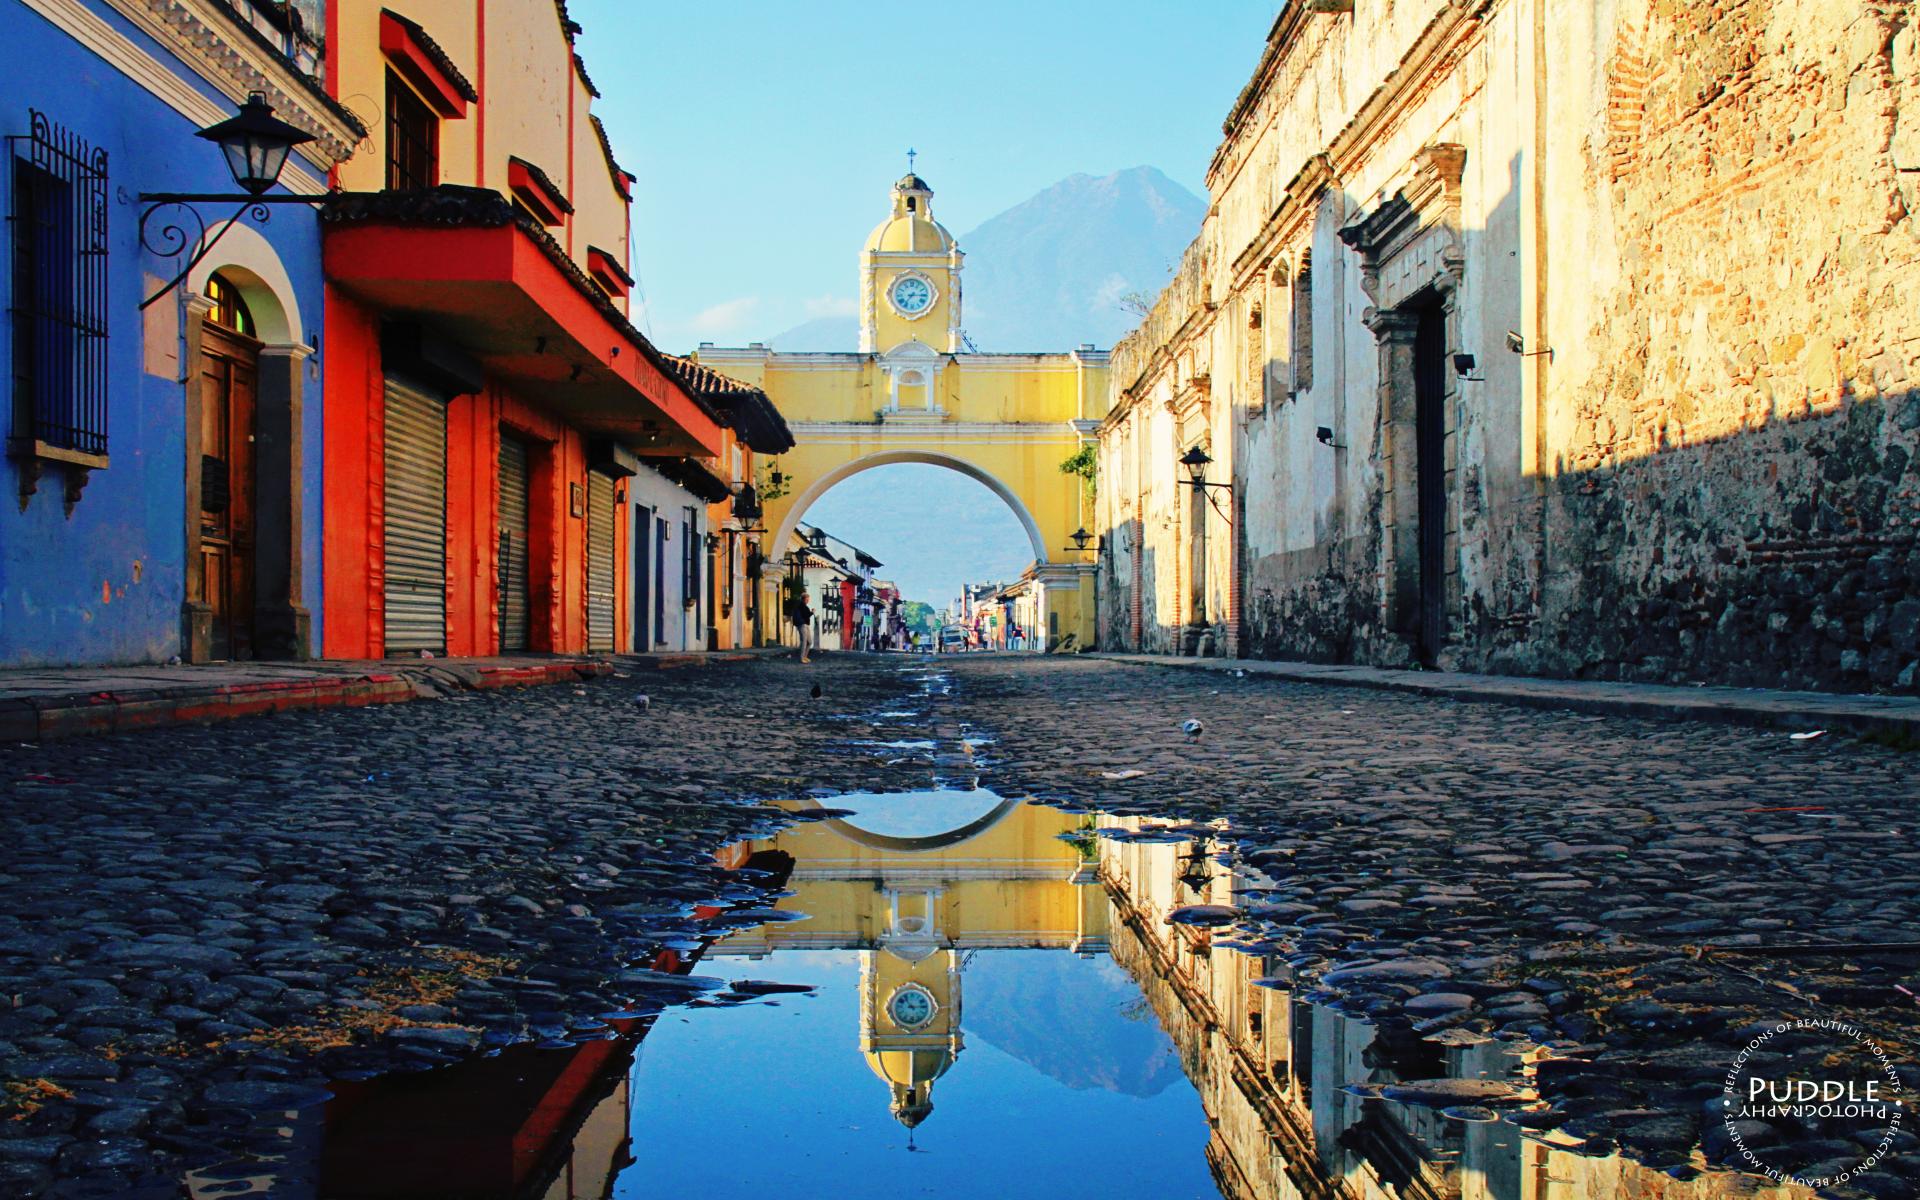 people, Guatemala, South America, Town, Street, Water, Cobblestone, Clocktowers, Old building, House, Arch, Mountains, Reflection, Watermarked Wallpaper